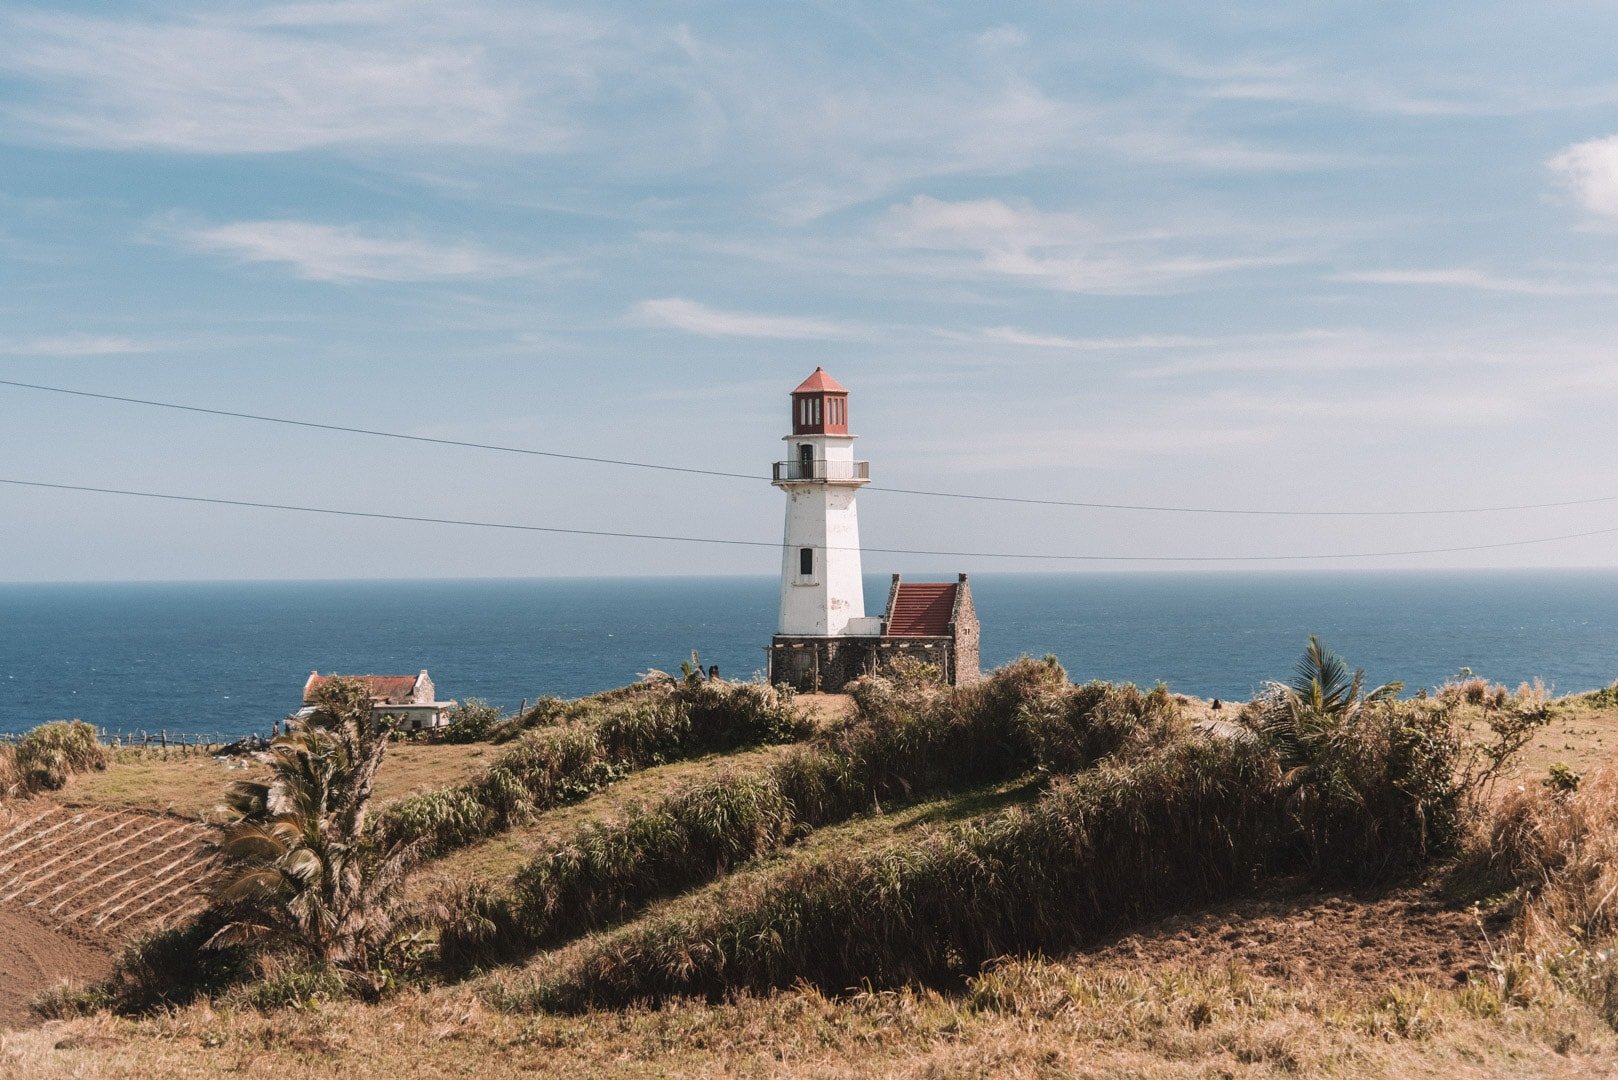 Things to do in Batanes, Transportation around Batanes, Batanes tourist spots, atms in batanes, wifi connection in batanes, how to go to Batanes, Tayid lighthouse